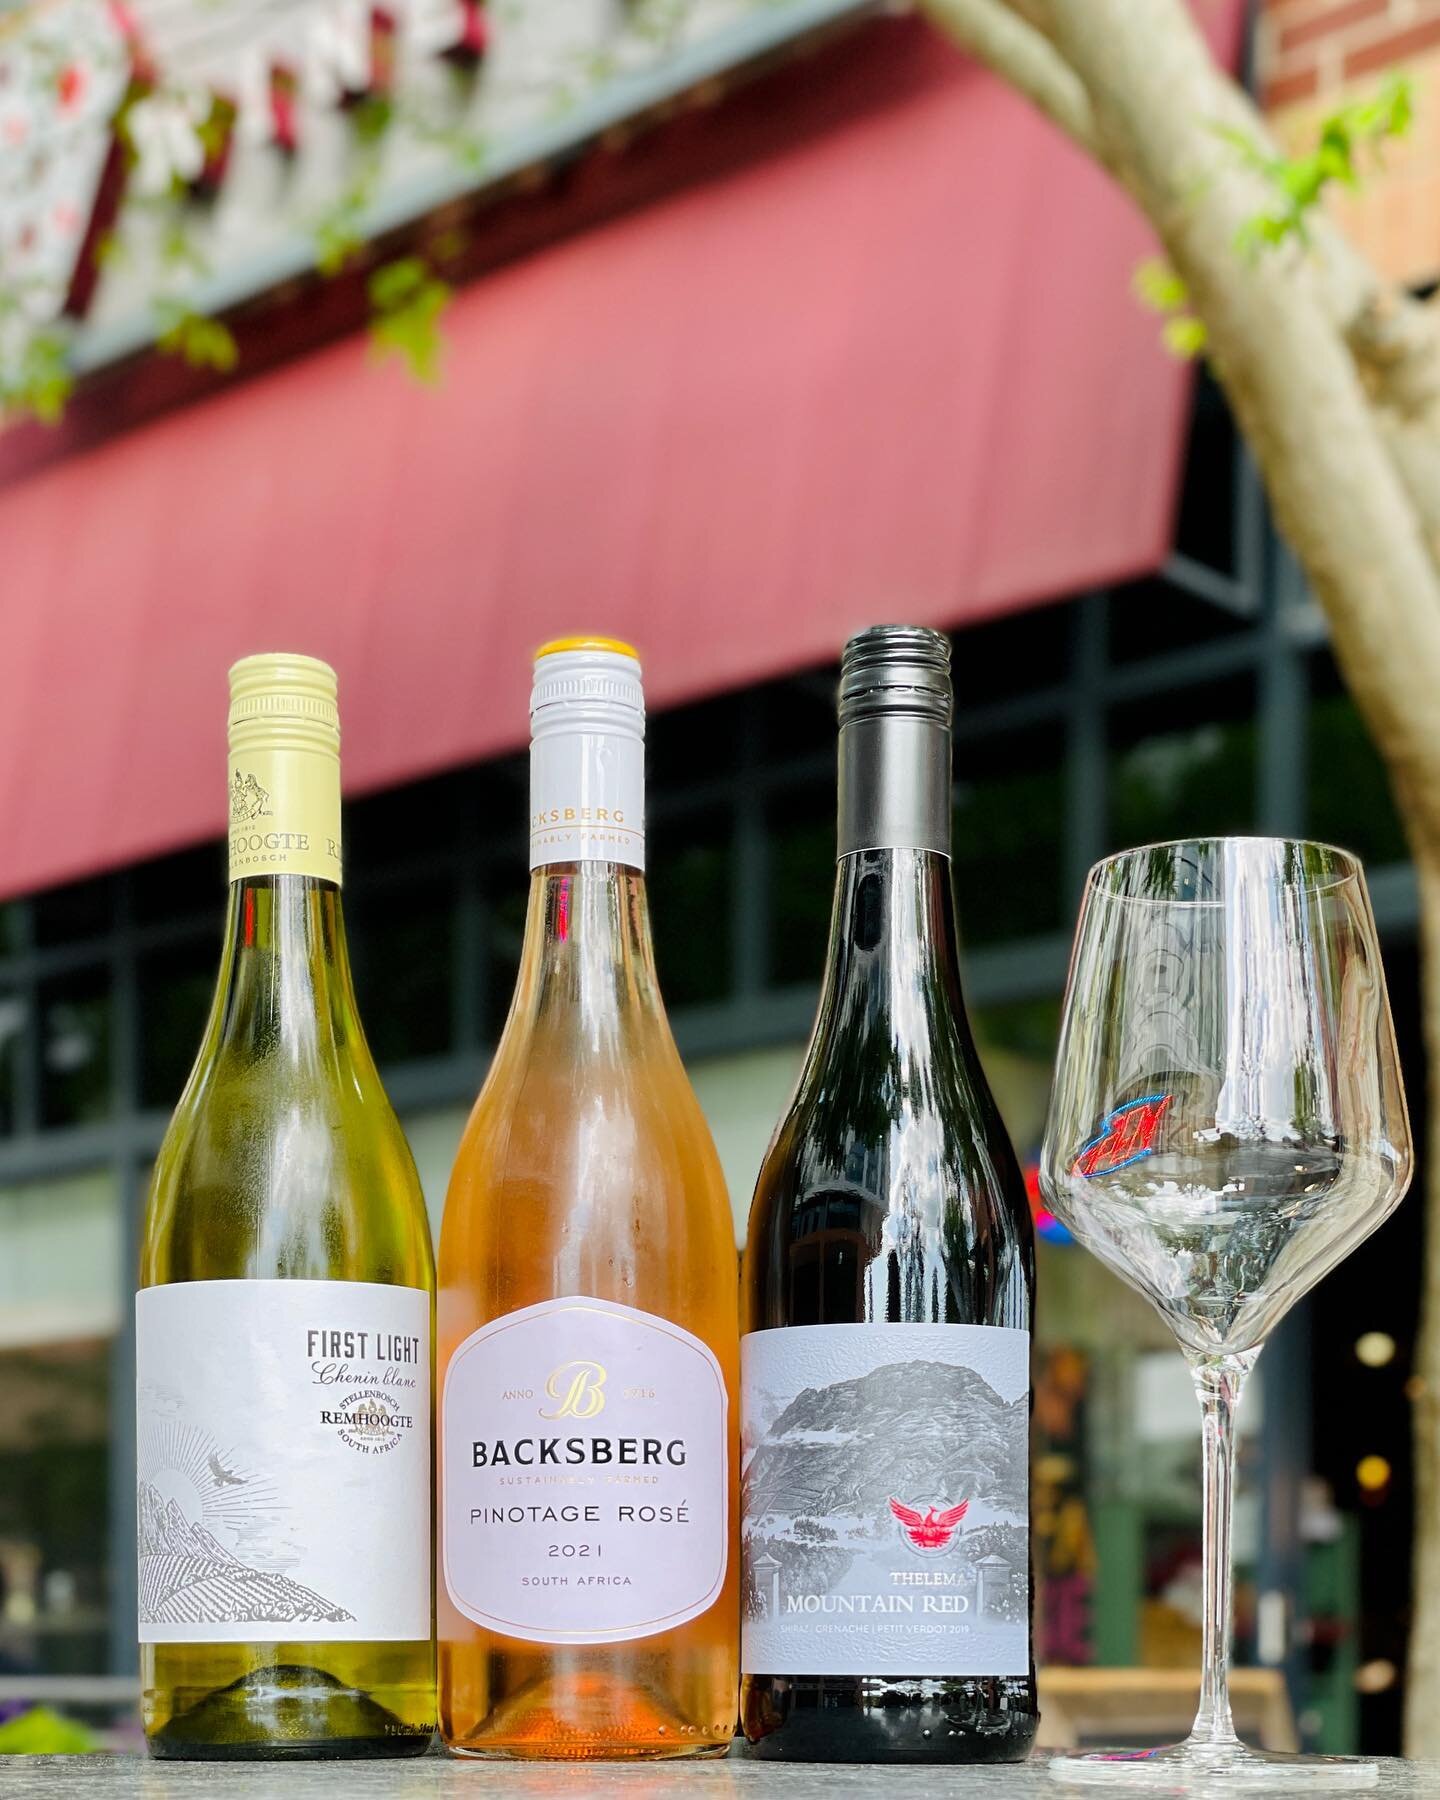 🍷Come try out our new region of focus ~ South Africa!

We&rsquo;re especially excited about the Backsberg Pinotage Ros&eacute; from Paarl!

This light &amp; refreshing ros&eacute; tastes of wild strawberries, mint &amp; grapefruit&hellip; and who co